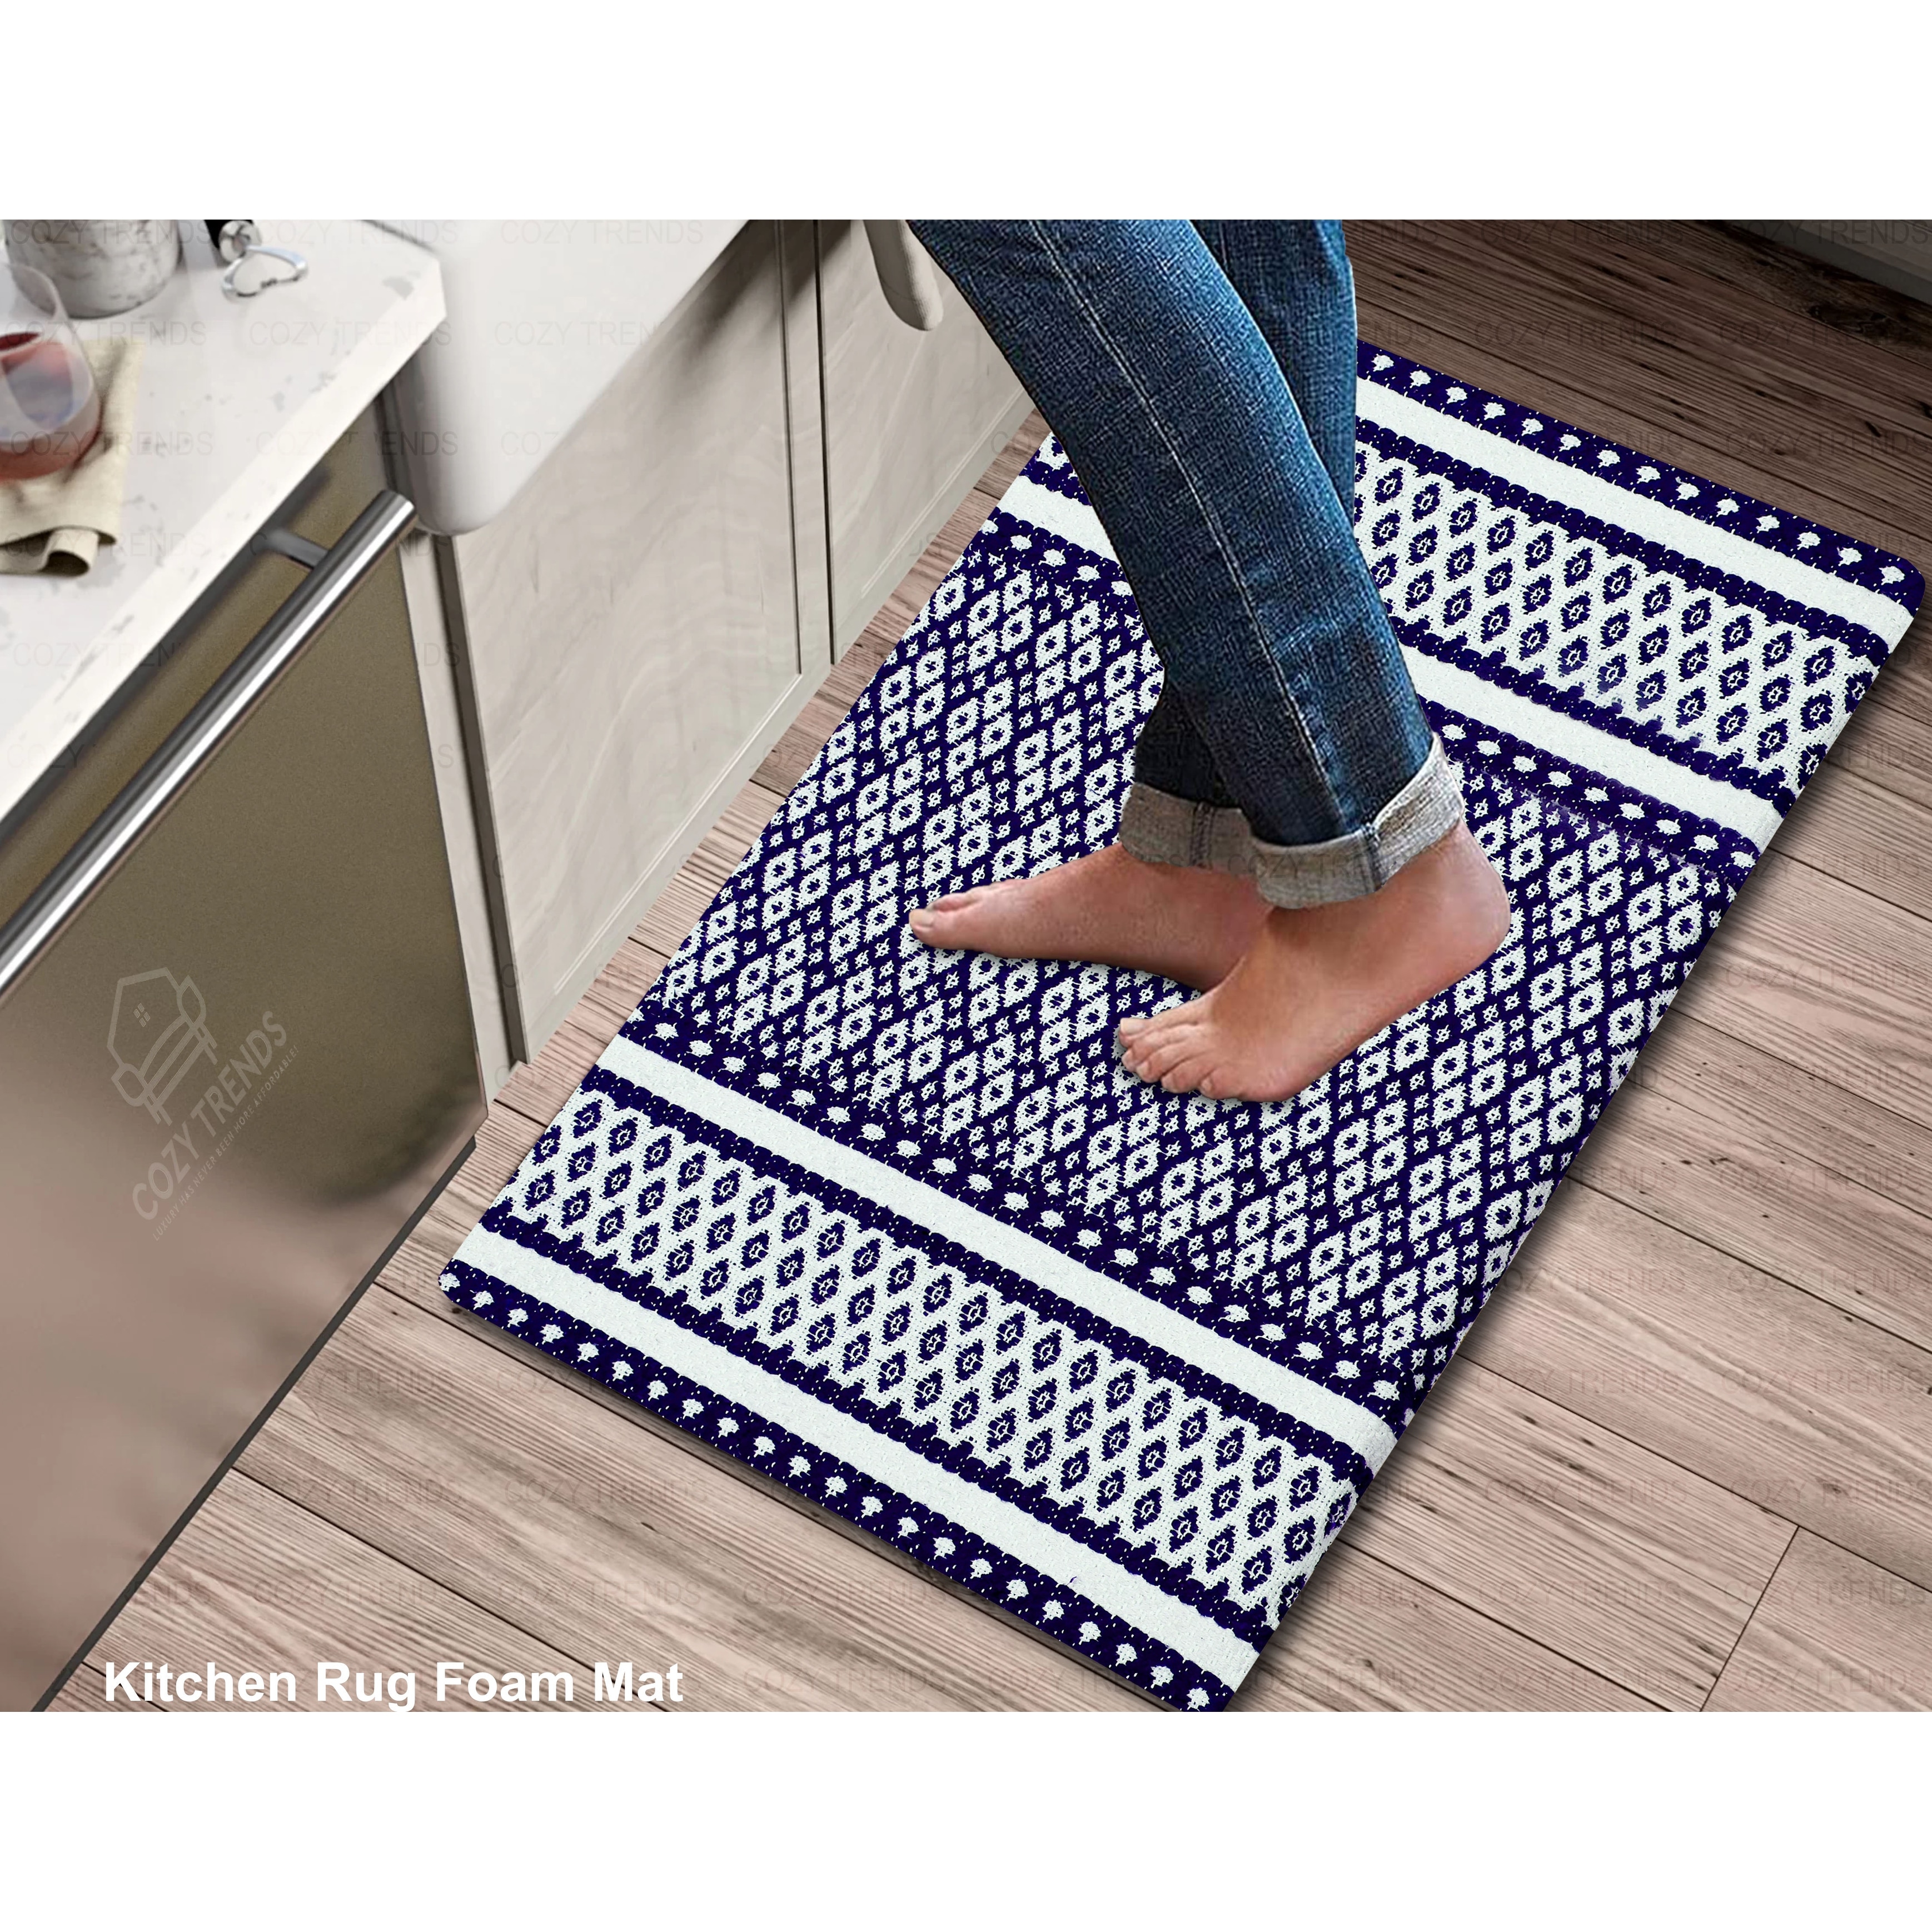 https://ak1.ostkcdn.com/images/products/is/images/direct/716c36b6acf0eedcfc2b217f5db8d660f8f40af0/Cotton-Kitchen-Mat-Cushioned-Anti-Fatigue-Rug%2C-Non-Slip-Mats-Comfort-Foam-Rug-for-Kitchen%2C-Office%2C-Sink%2C-Laundry---18%27%27x30%27%27.jpg